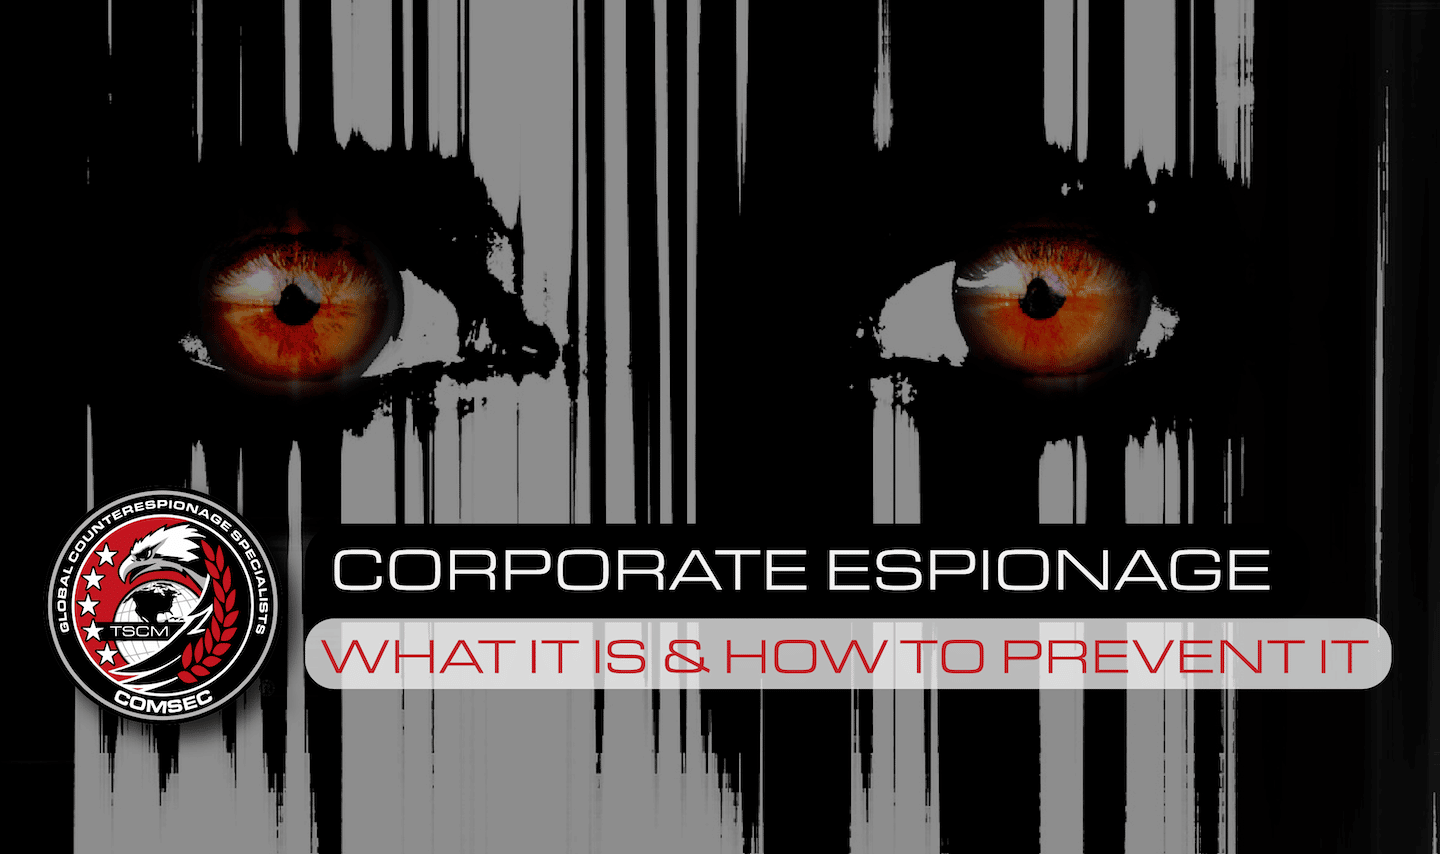 Corporate Espionage What It Is & How To Prevent It